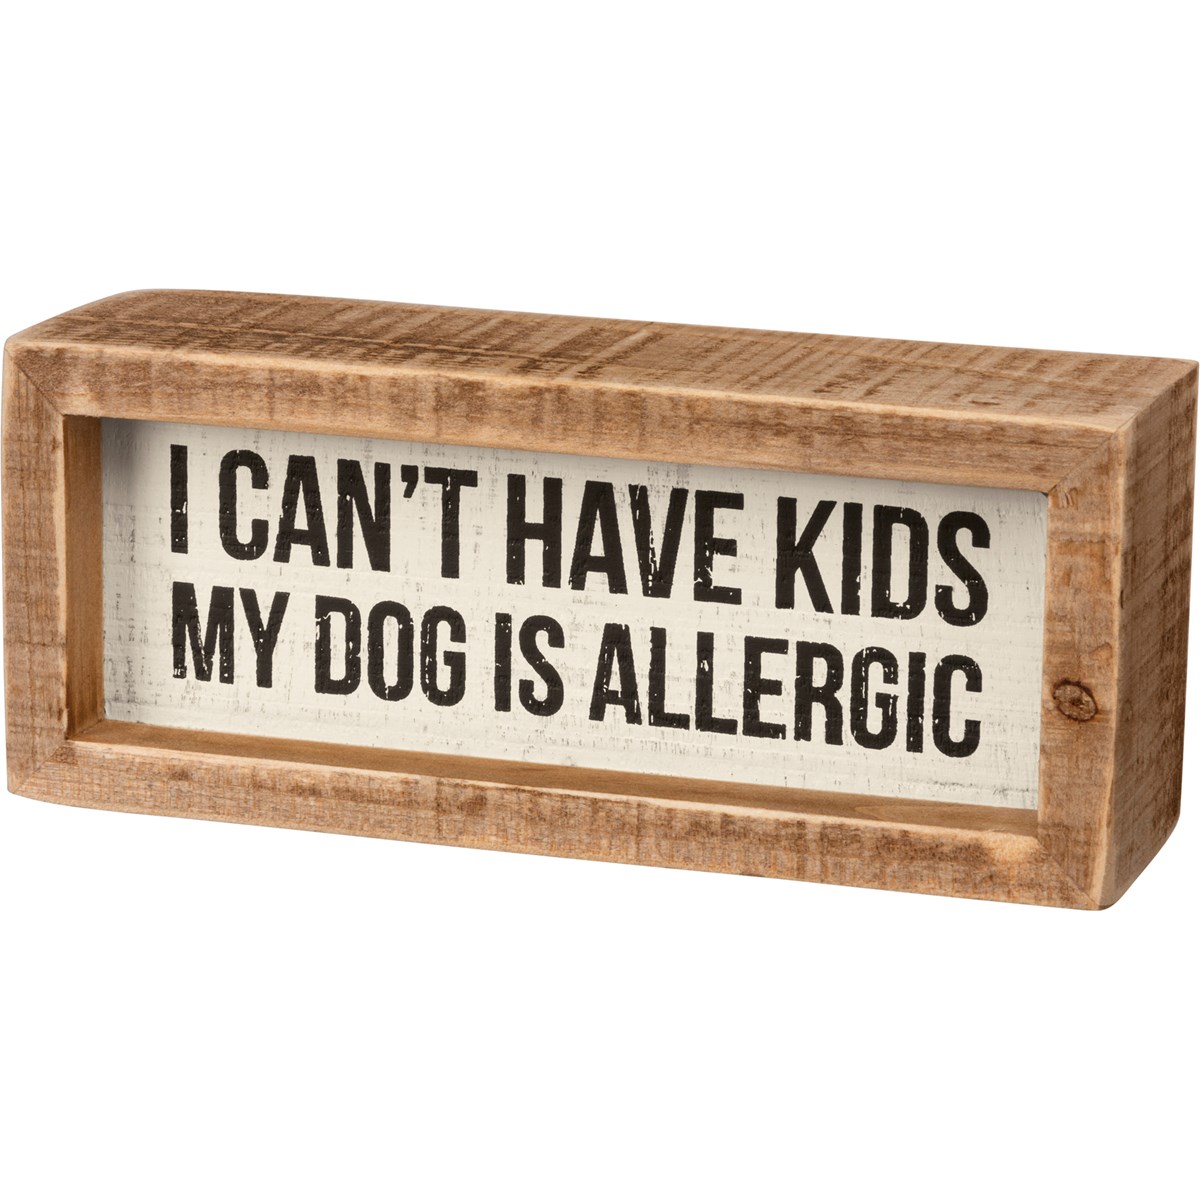 I Can't Have Kids Dog Is Allergic Inset Box Sign - Wood